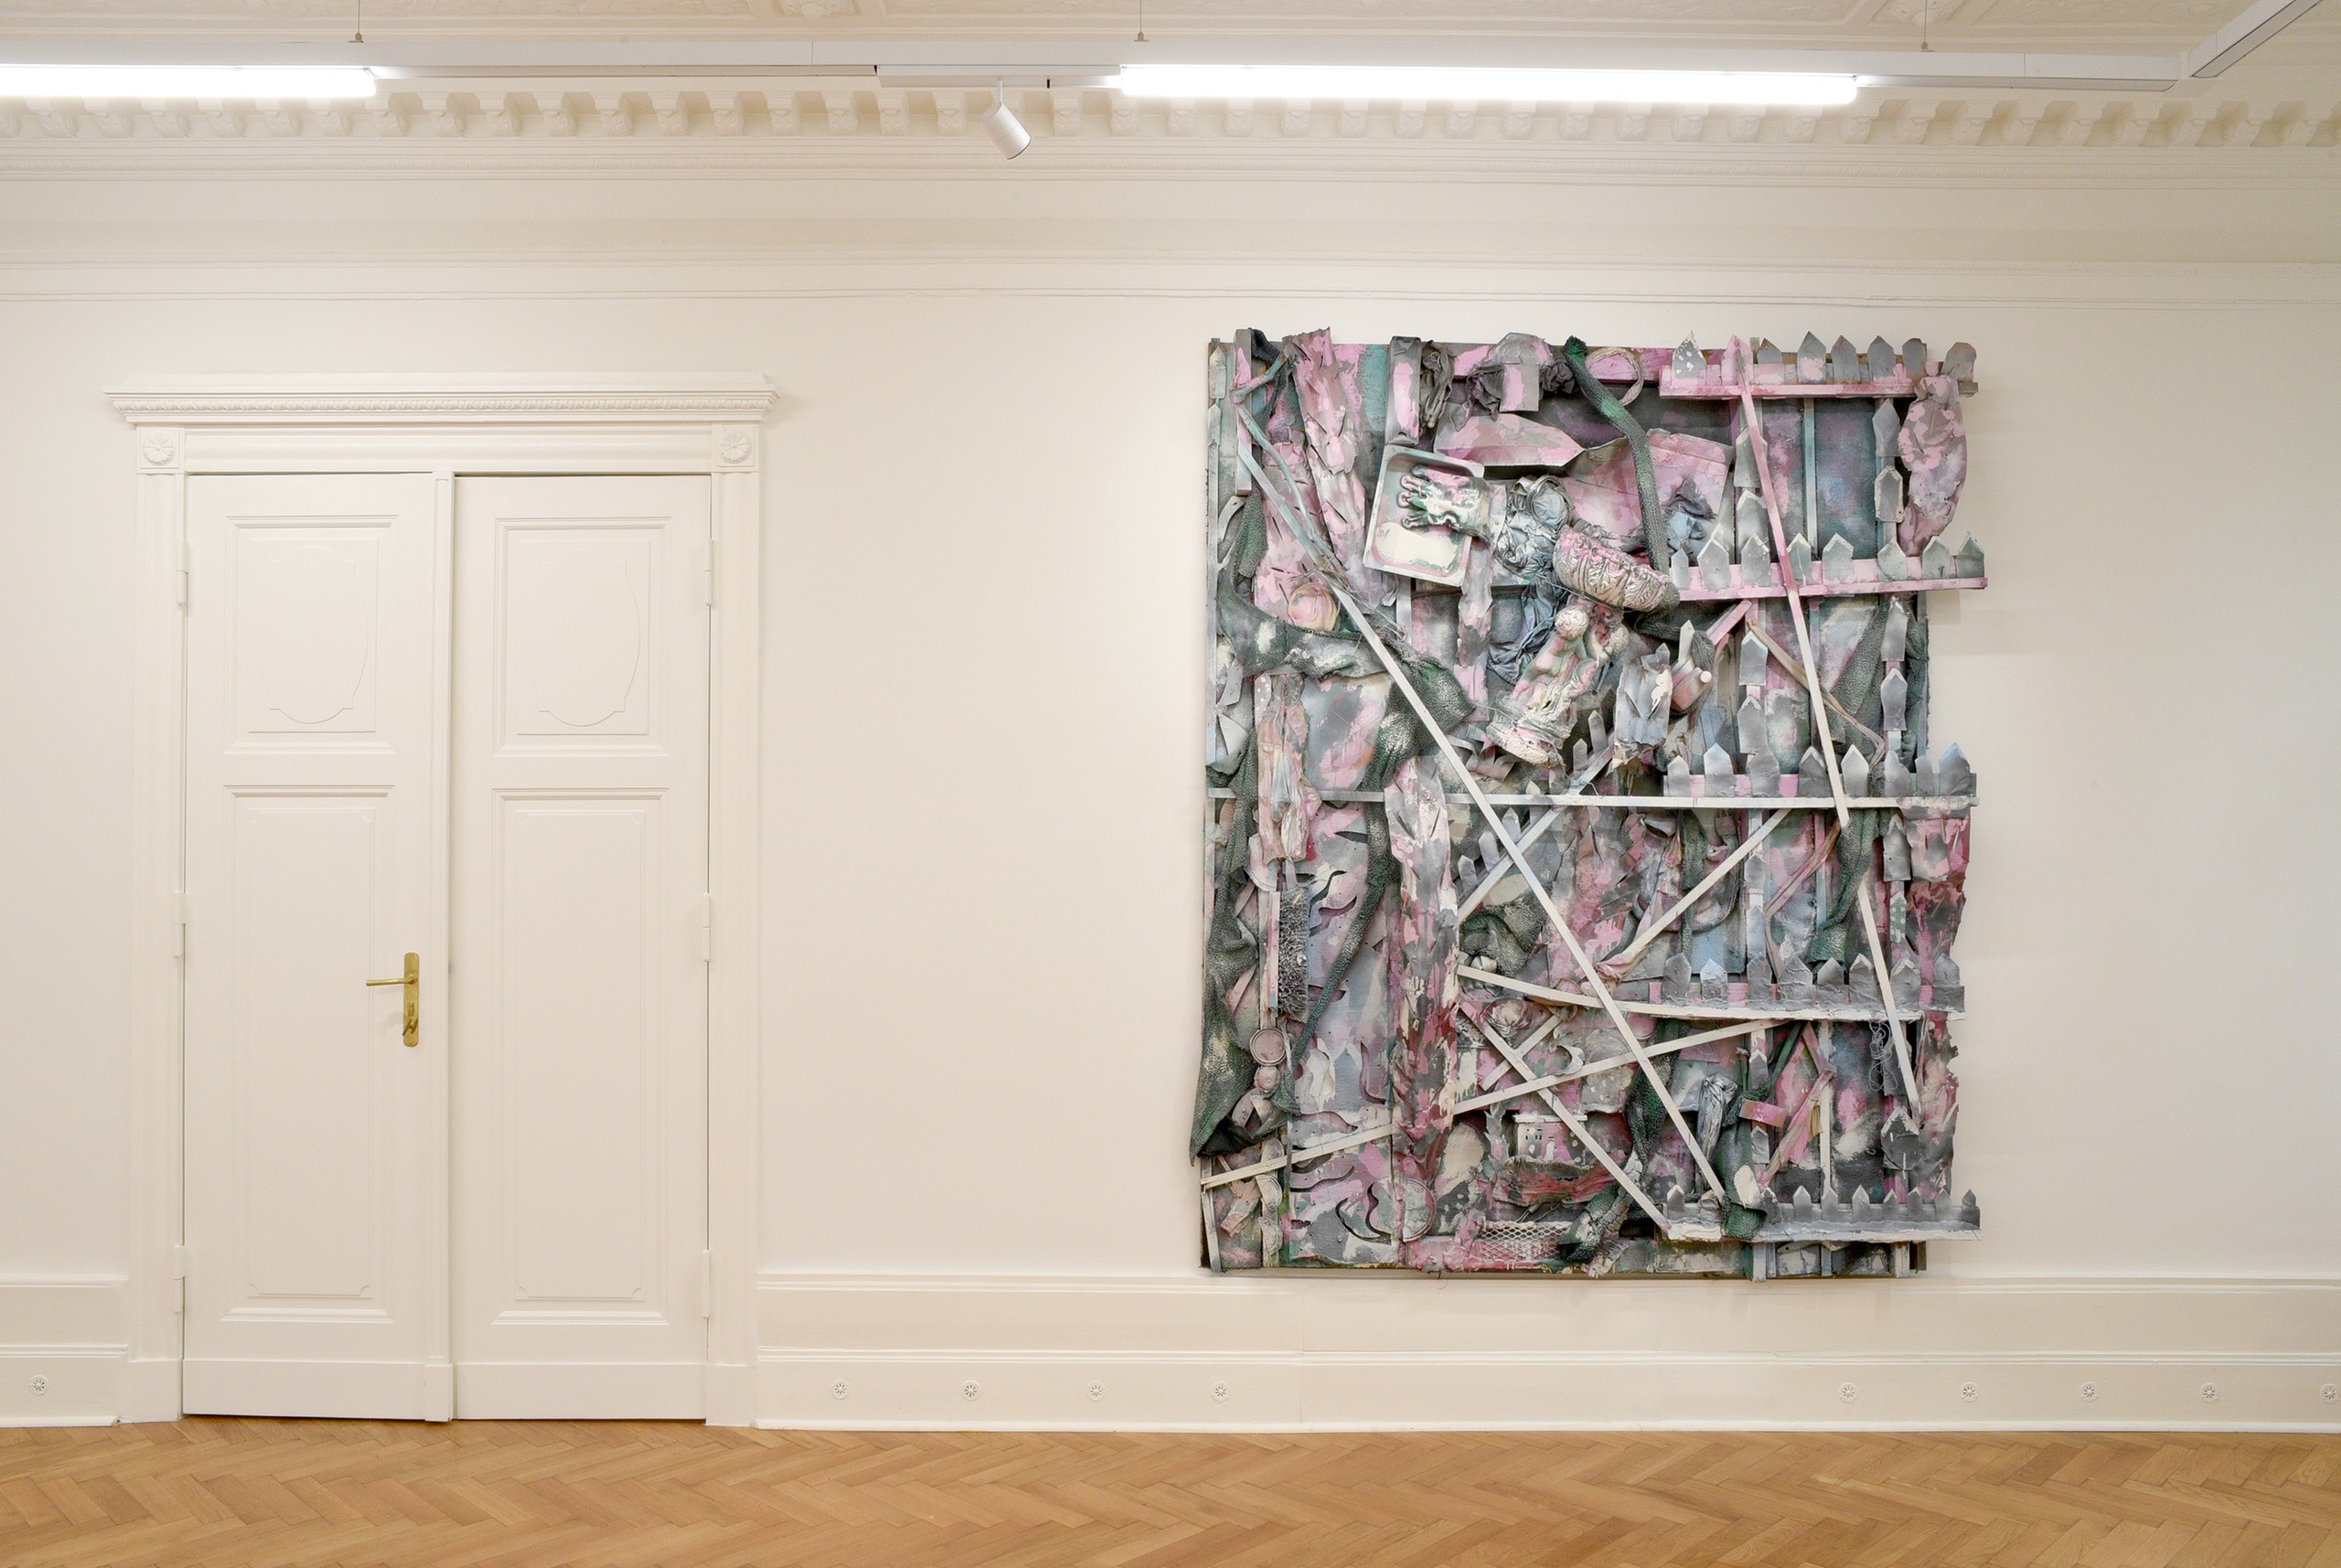 Installation view, Allegory and History, Société, Berlin, 2021